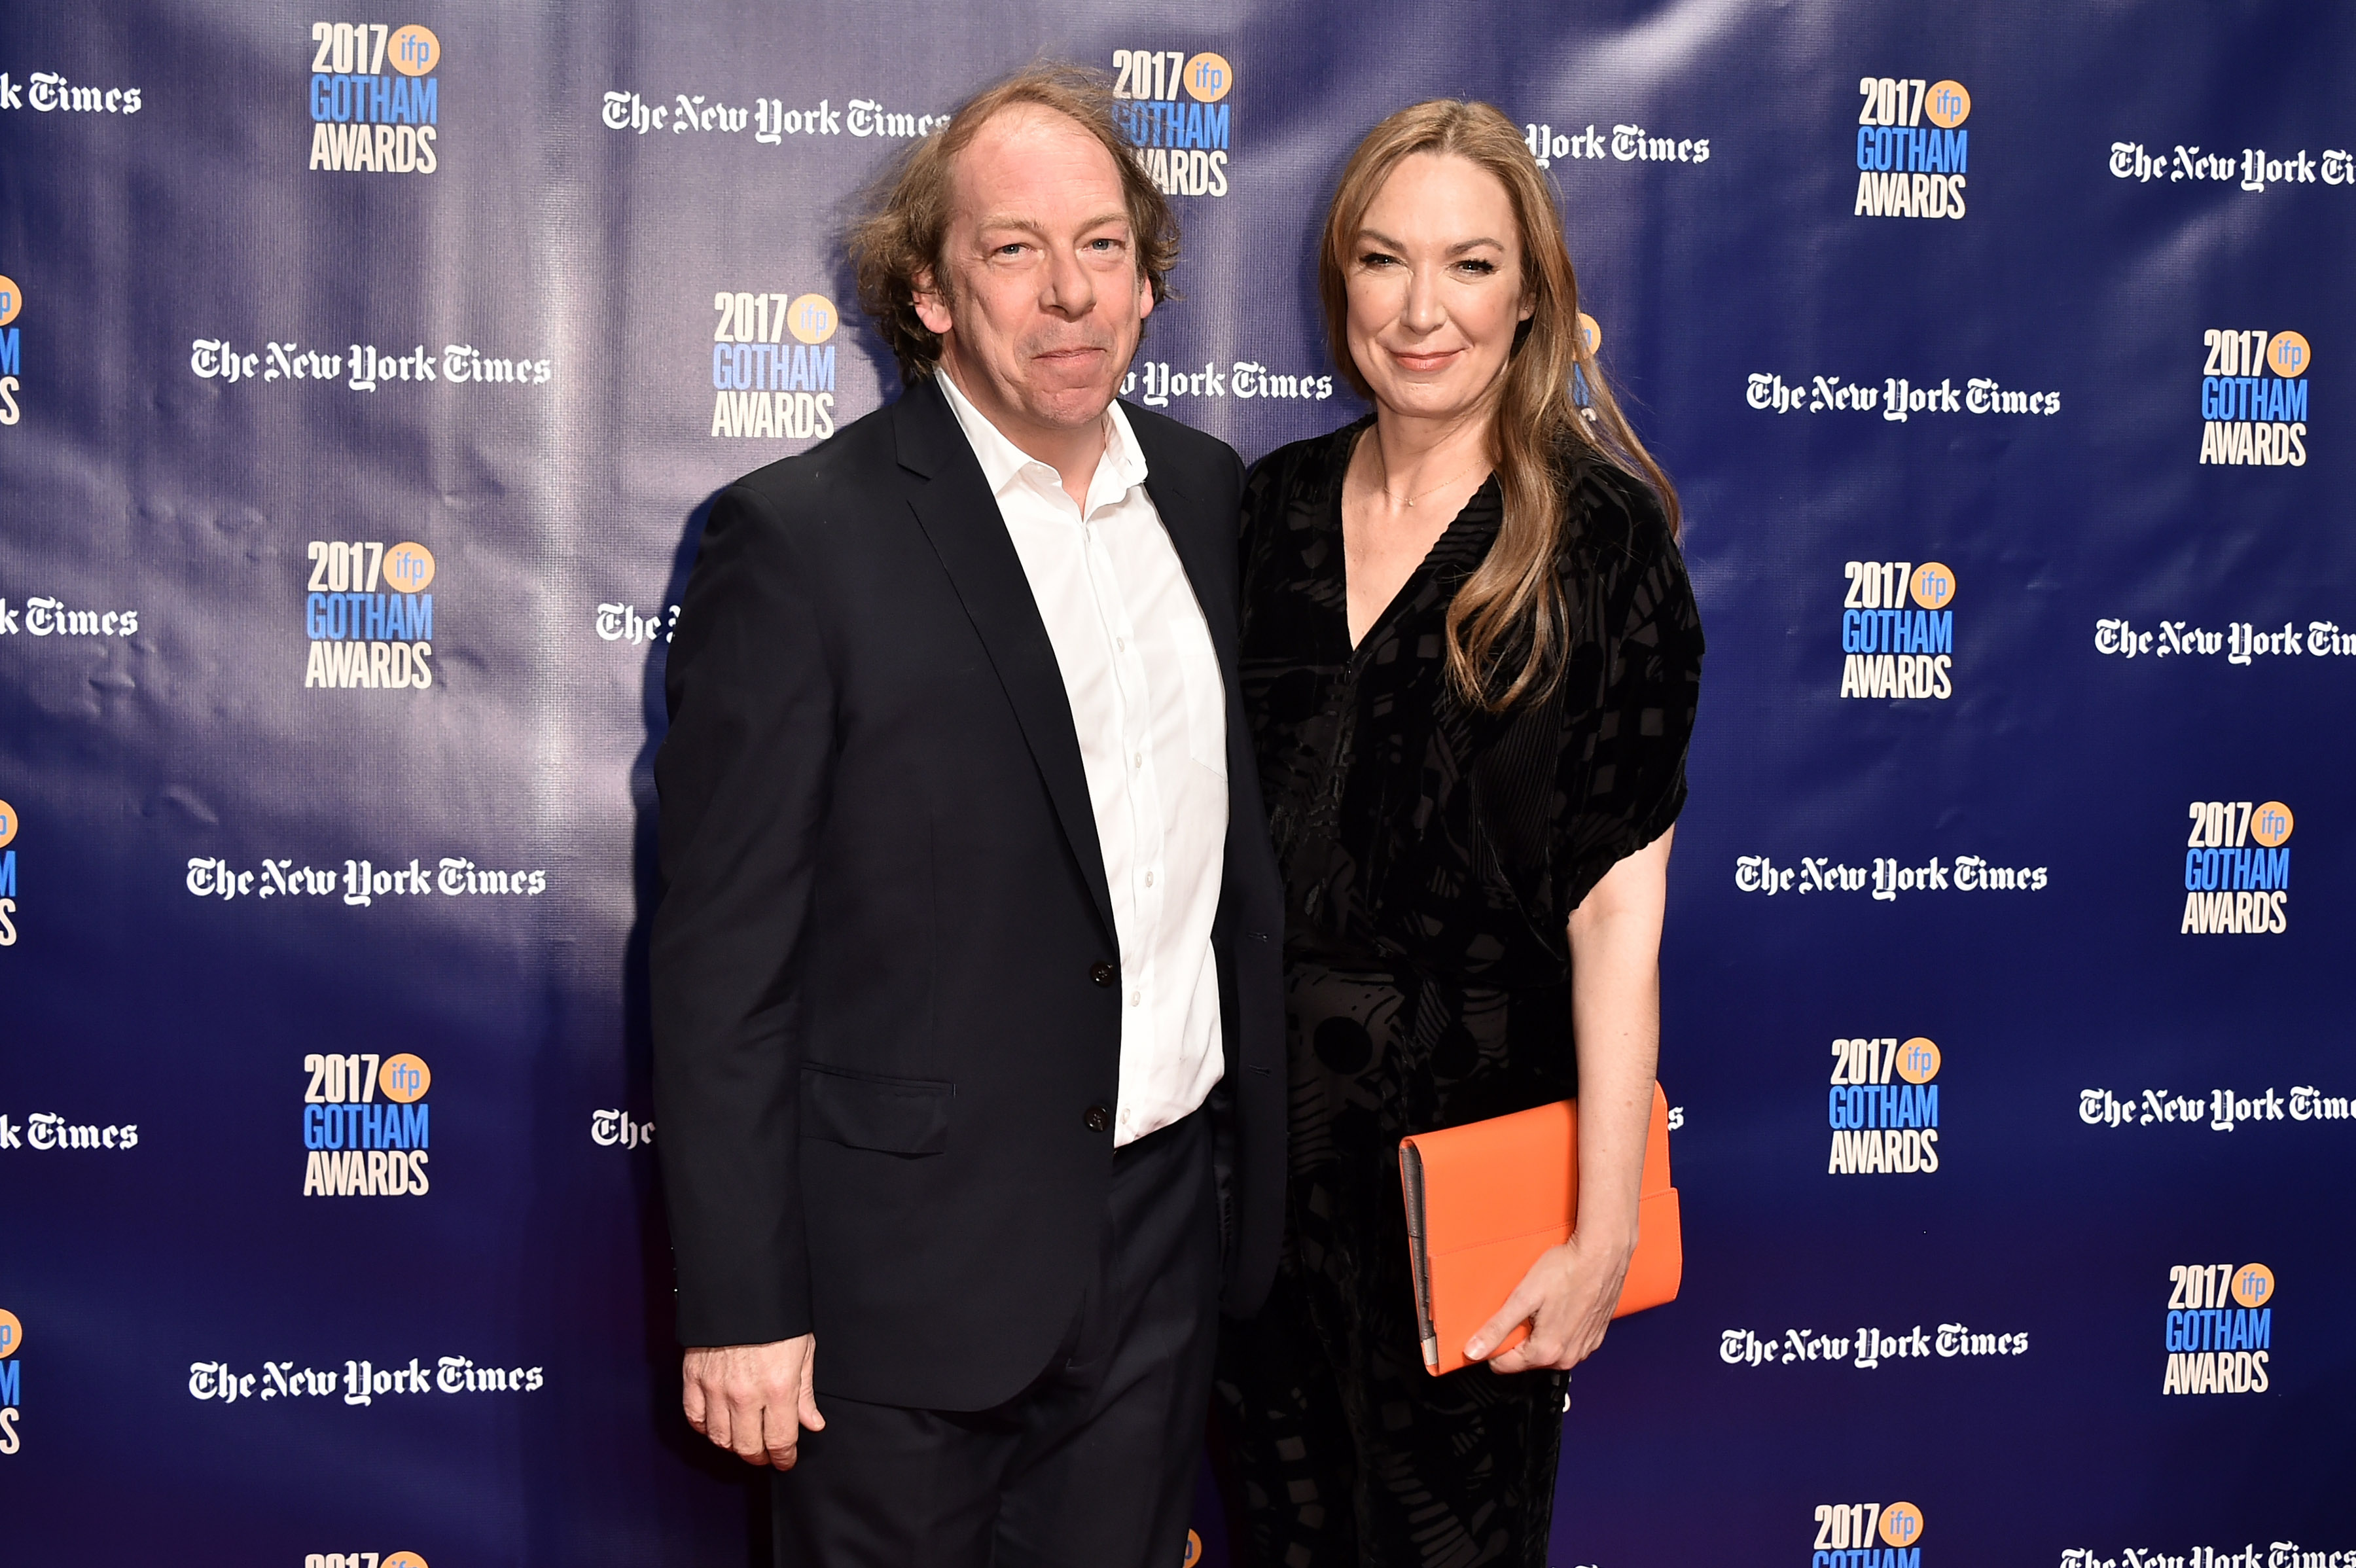 Bill Camp and Elizabeth Marvel at the IFP's 27th Annual Gotham Independent Film Awards on November 27, 2017 in New York City. | Source: Getty Images